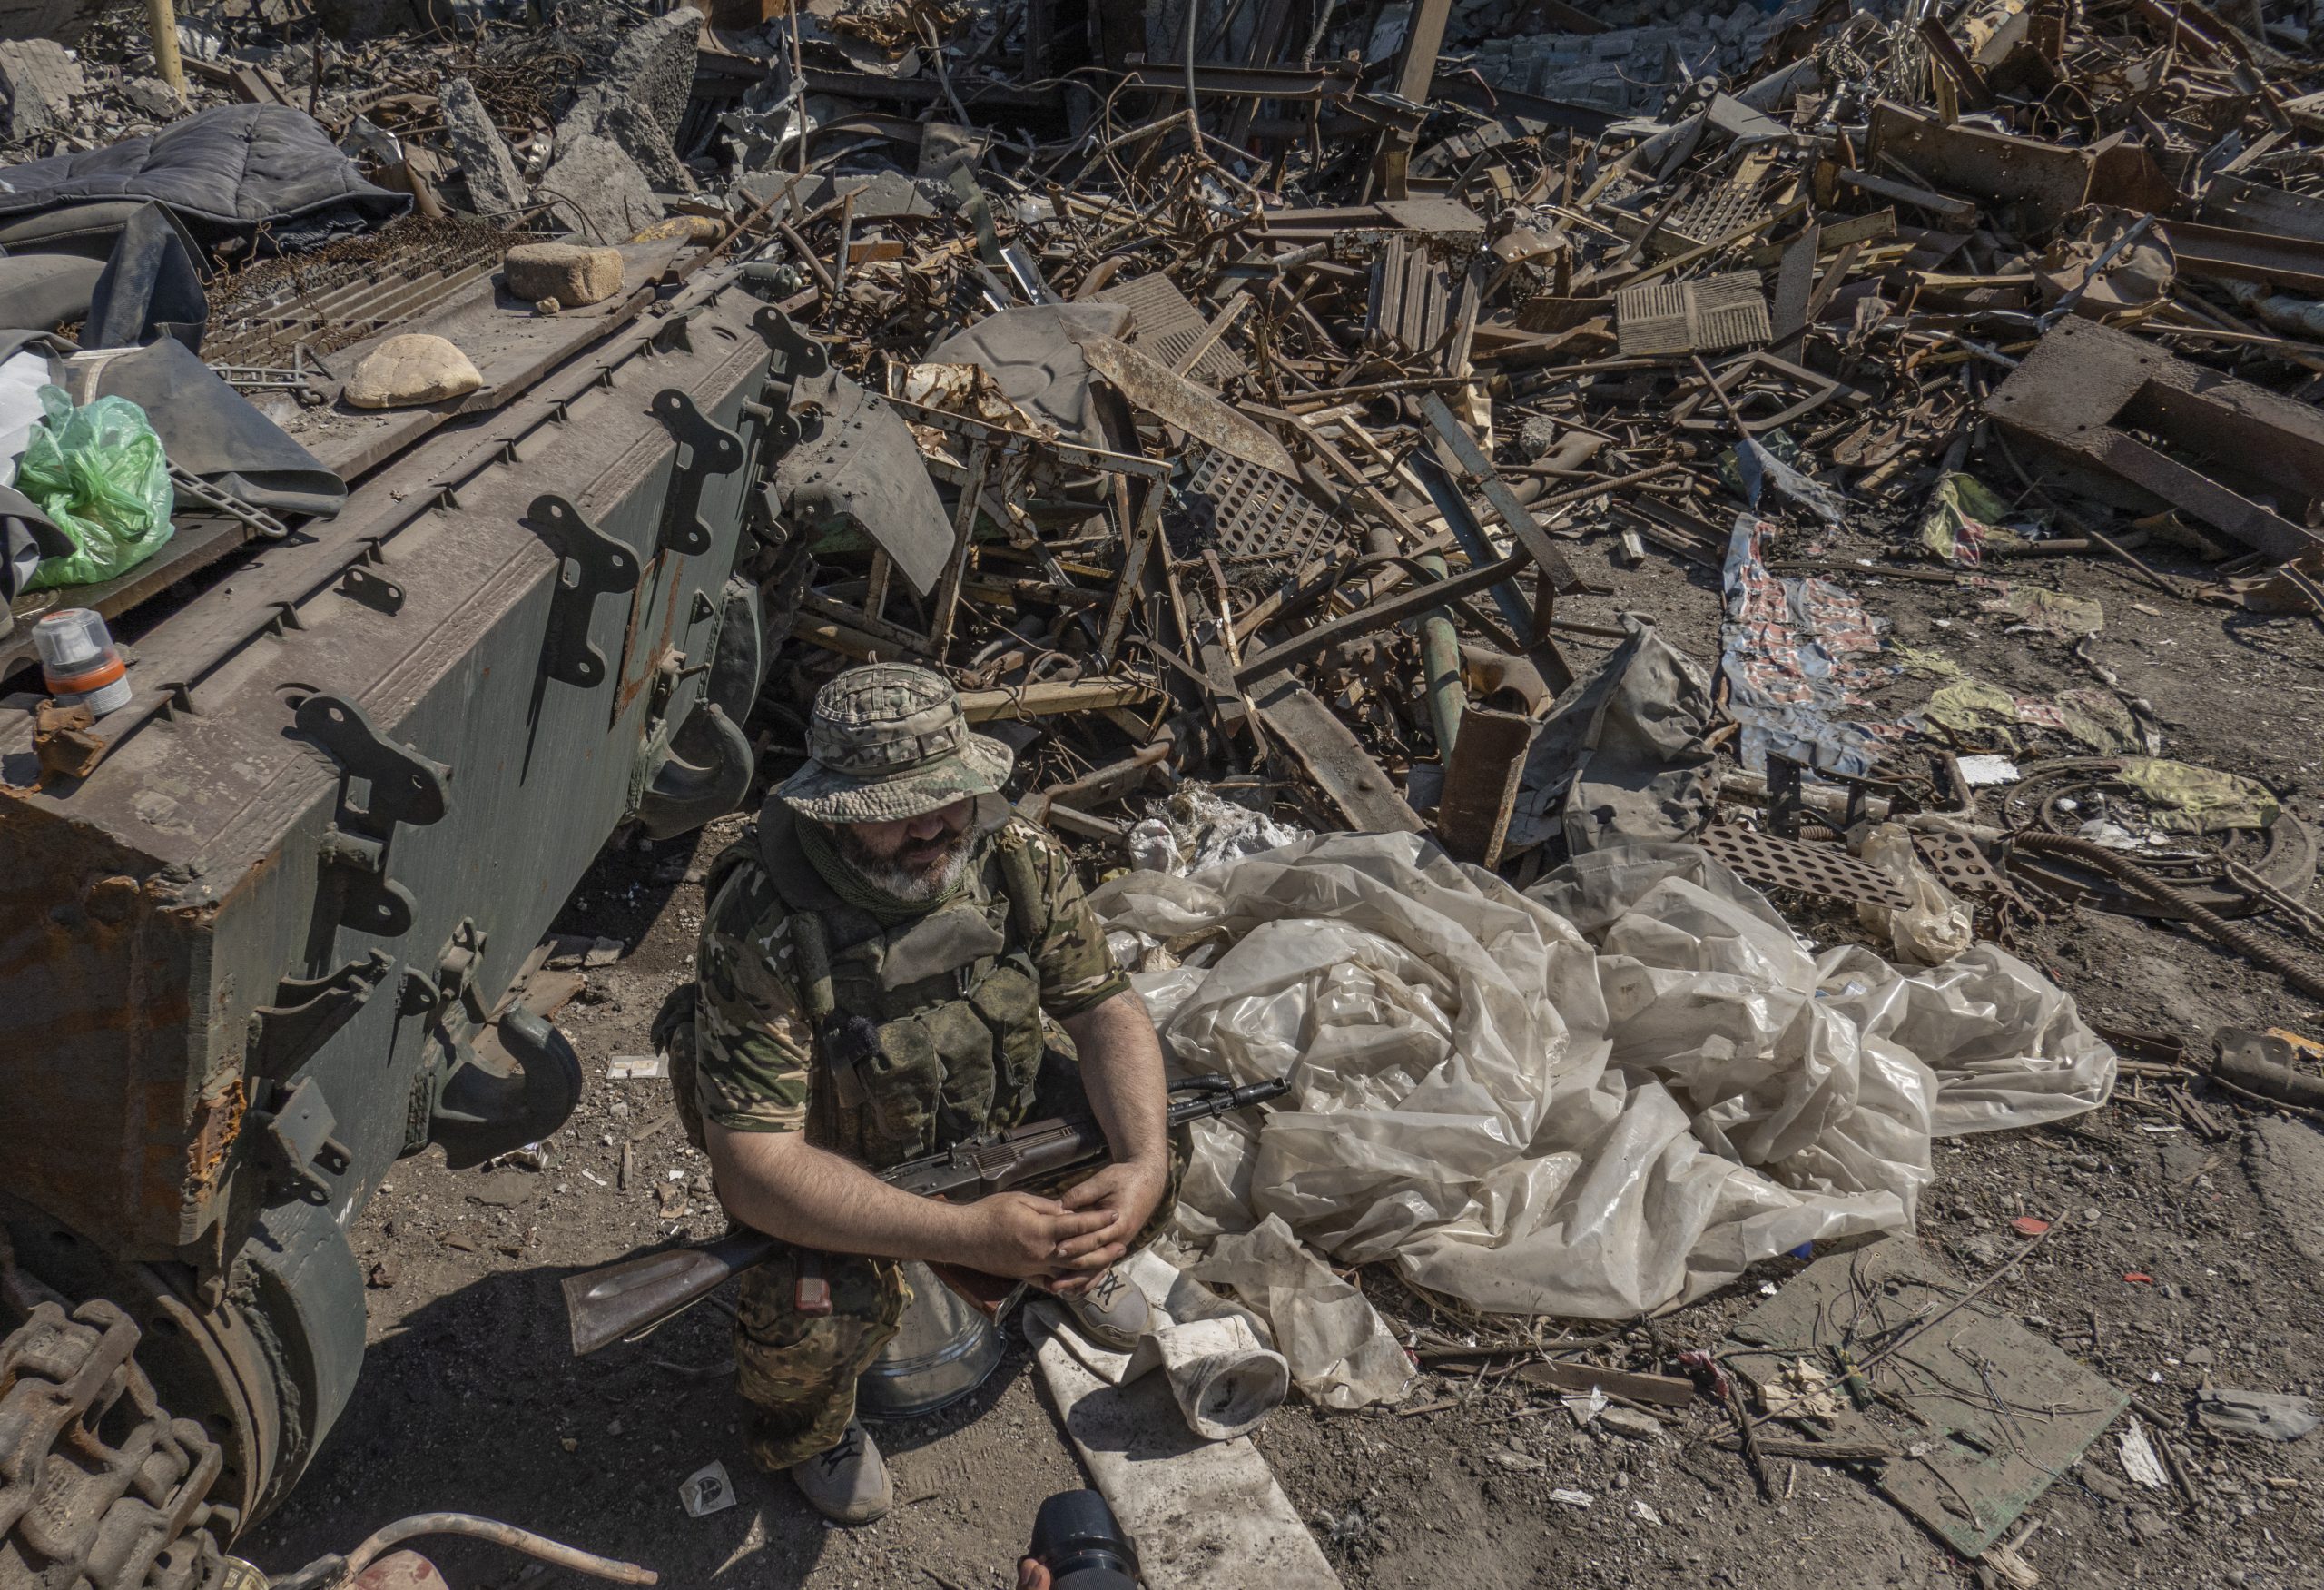 epa10011297 A picture taken during a visit to Mariupol organized by the Russian military shows a self-proclaimed Donetsk People Republic militia on guard at the destroyed entrance of the Azovstal steel plant in Mariupol, eastern Ukraine, 13 June 2022. According to a statement by the Ukrainian Presidential Office on 06 June quoting President Zelensky, there may be more than 2,500 prisoners from the Azovstal plant being held captive by Russian forces. On 24 February Russian troops entered Ukrainian territory starting a conflict that has provoked destruction and a humanitarian crisis.  EPA/SERGEI ILNITSKY